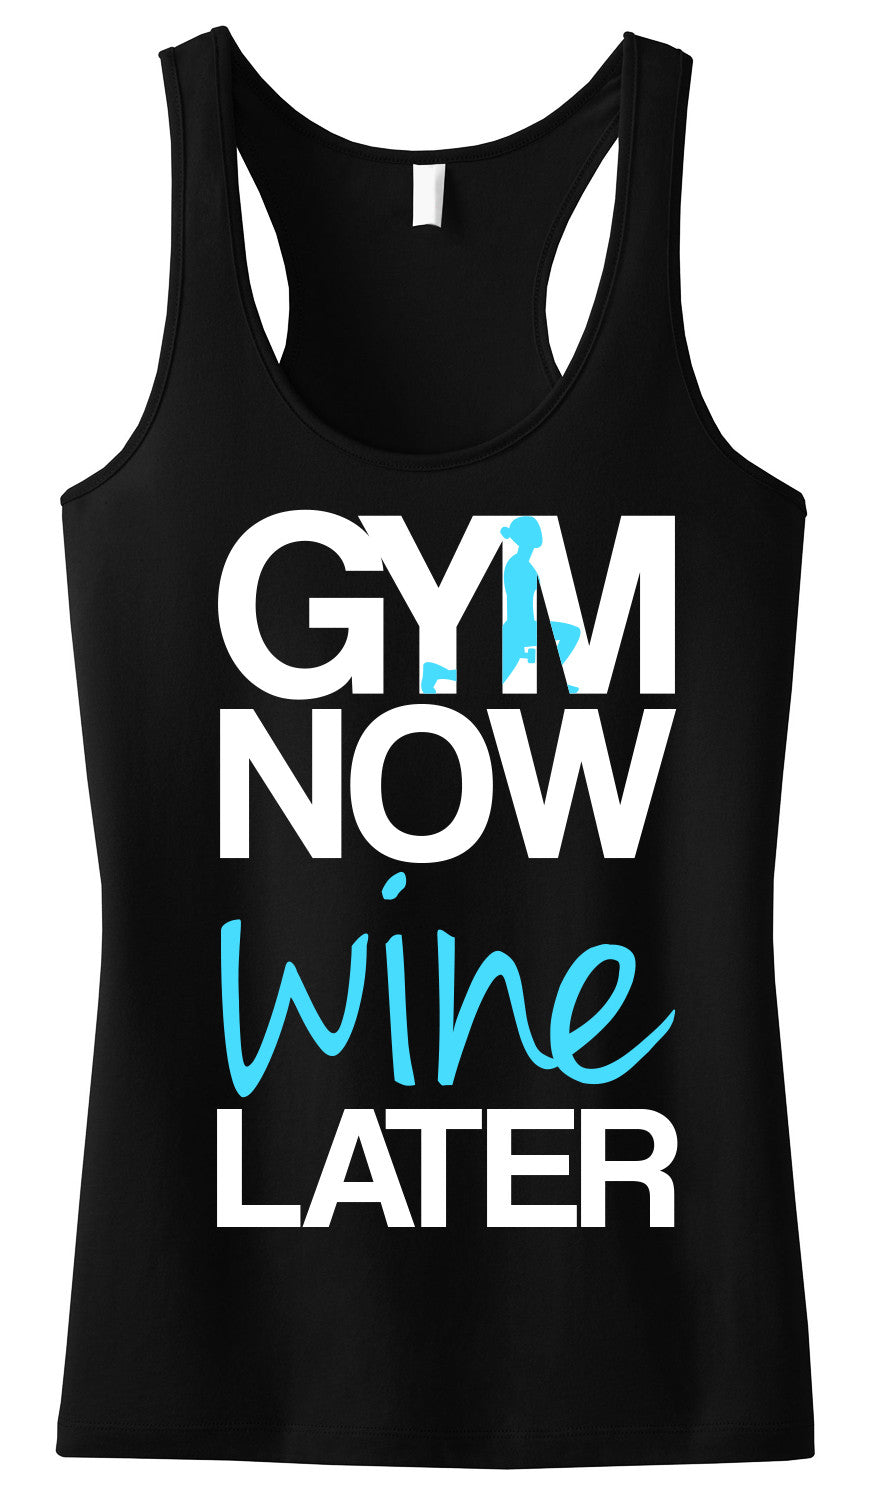 GYM Now Tank Top Black with Teal – NobullWoman Apparel